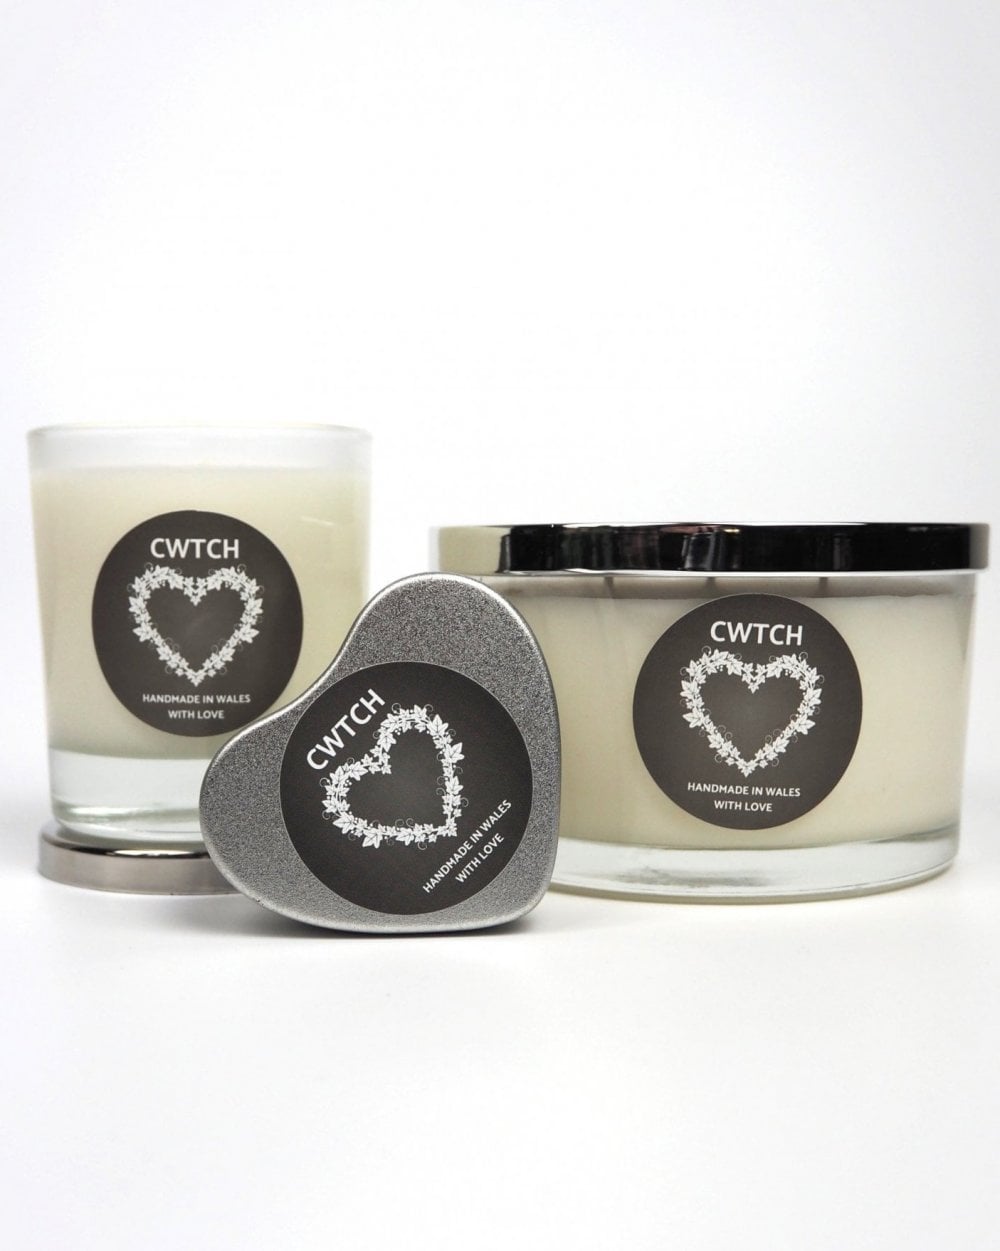 Cwtch Large 3 Wick Candle